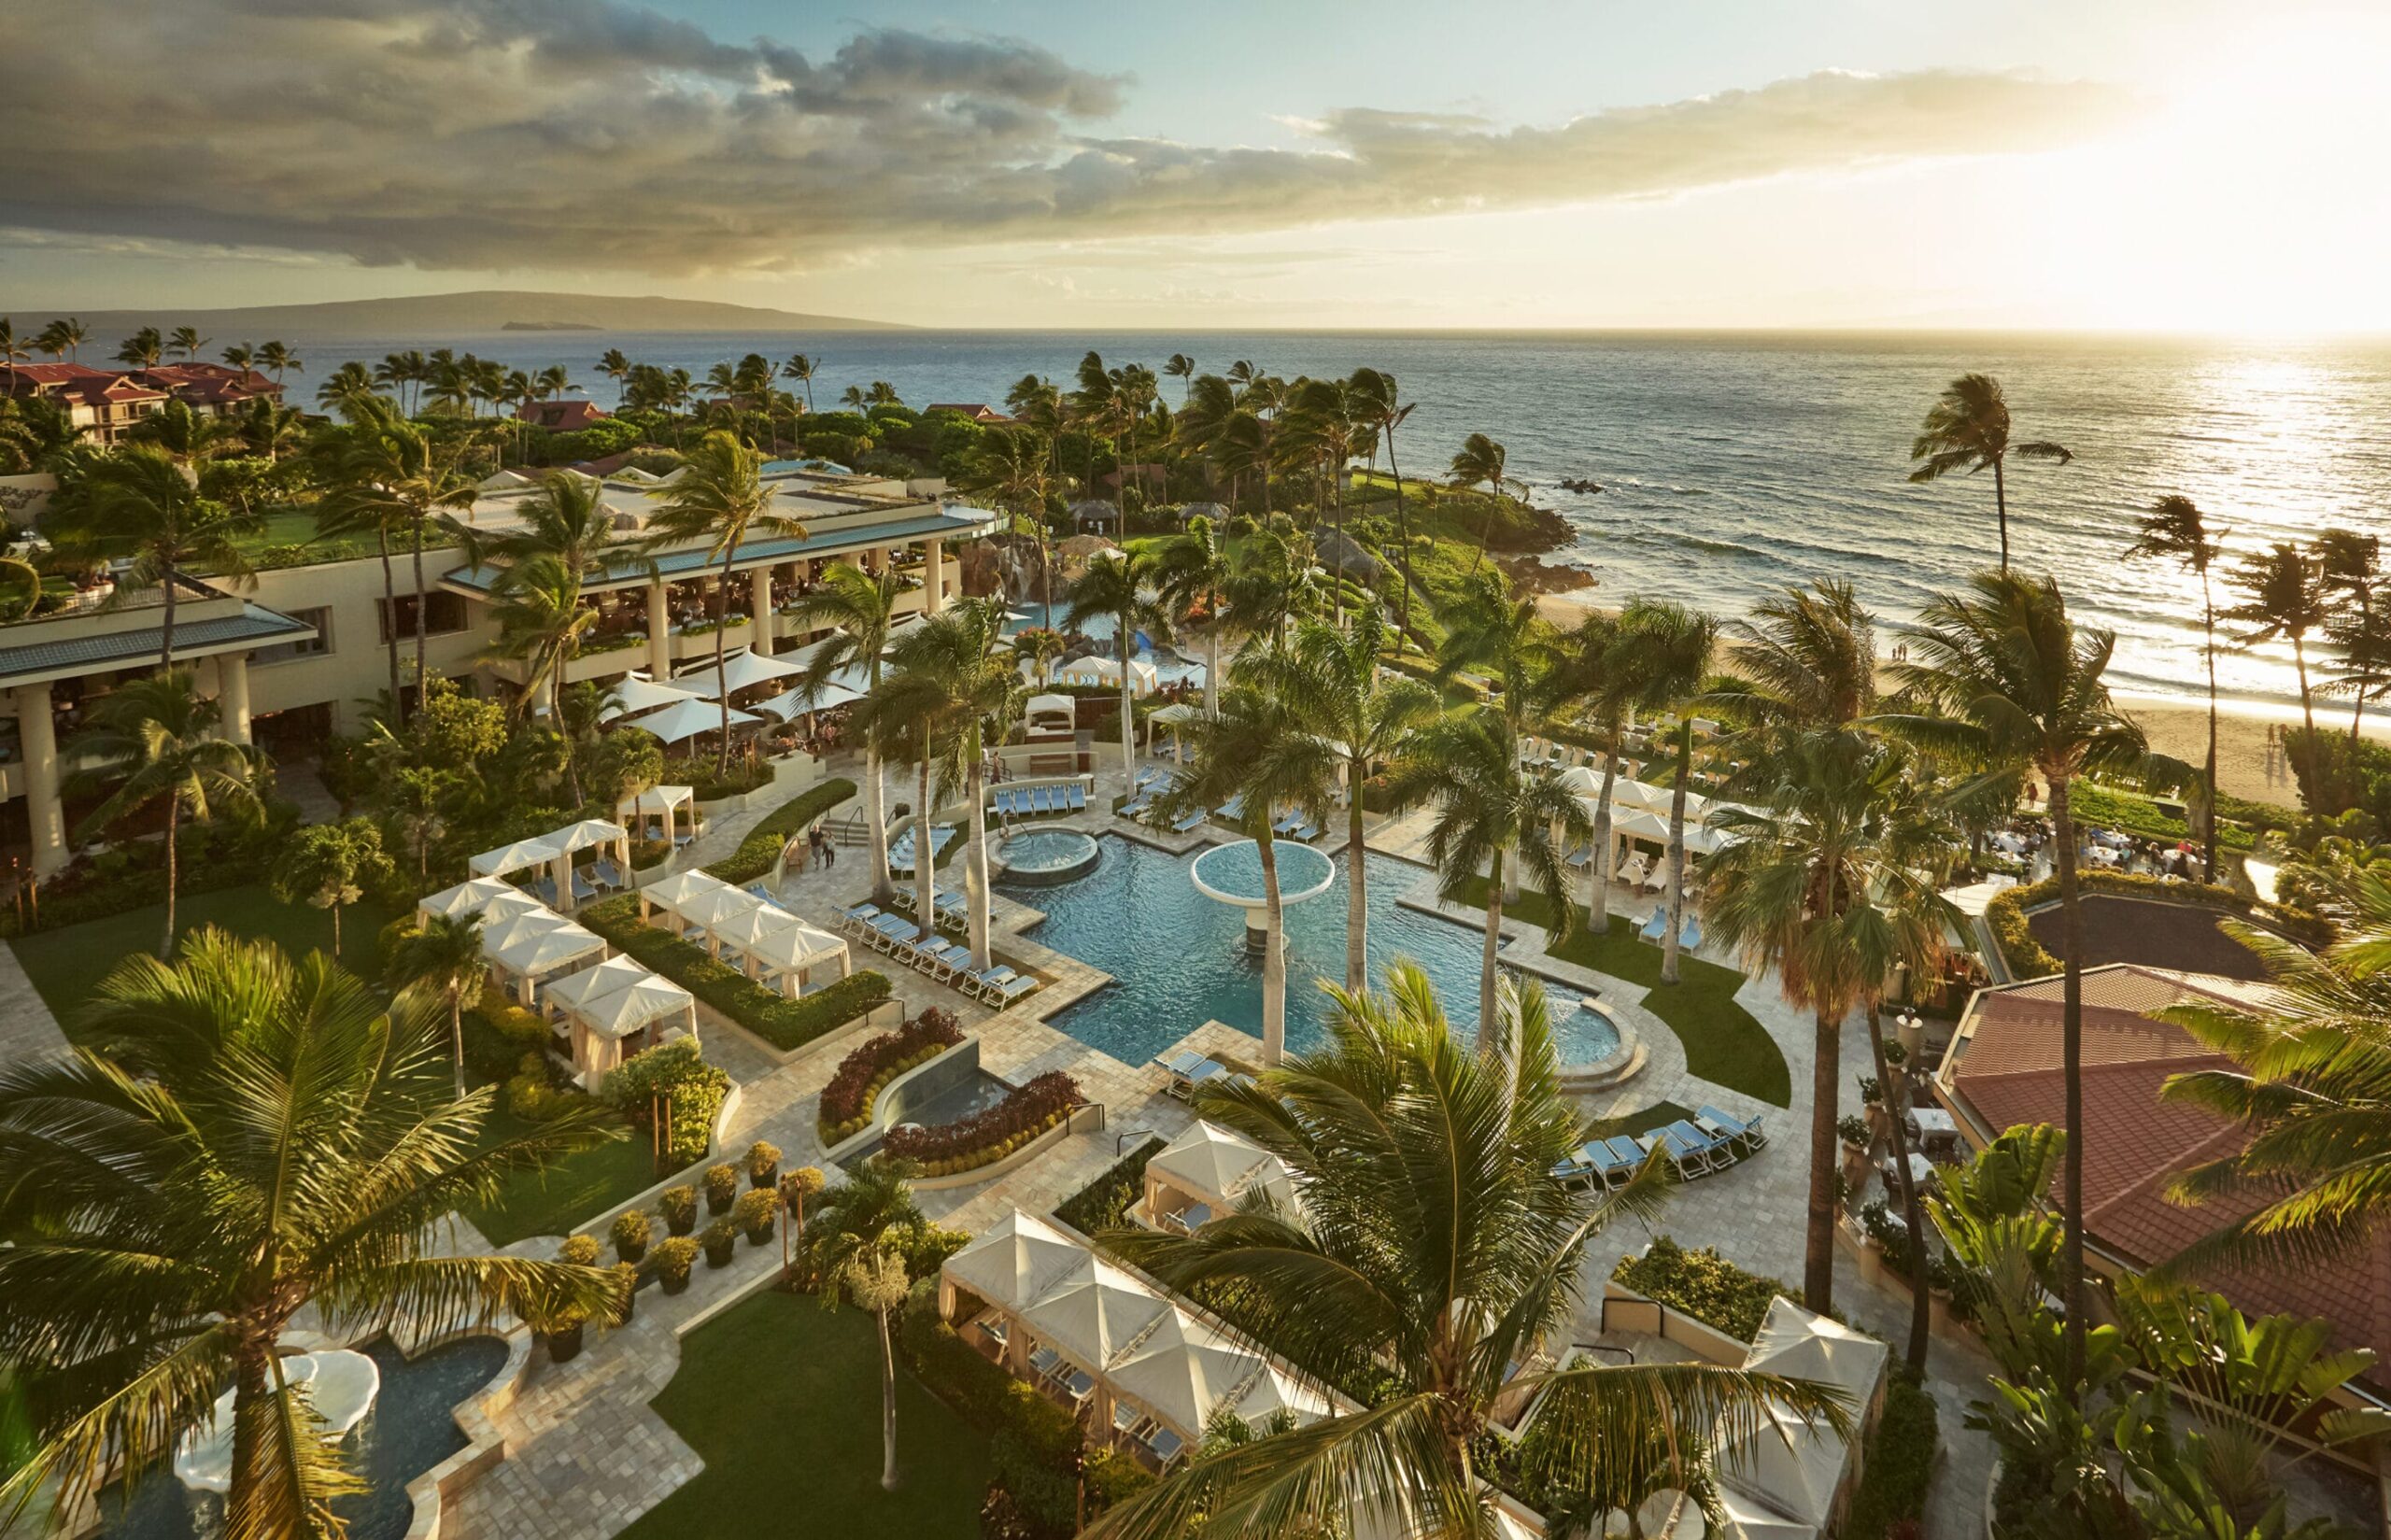 The Most Luxurious Maui Hotels on the Beach